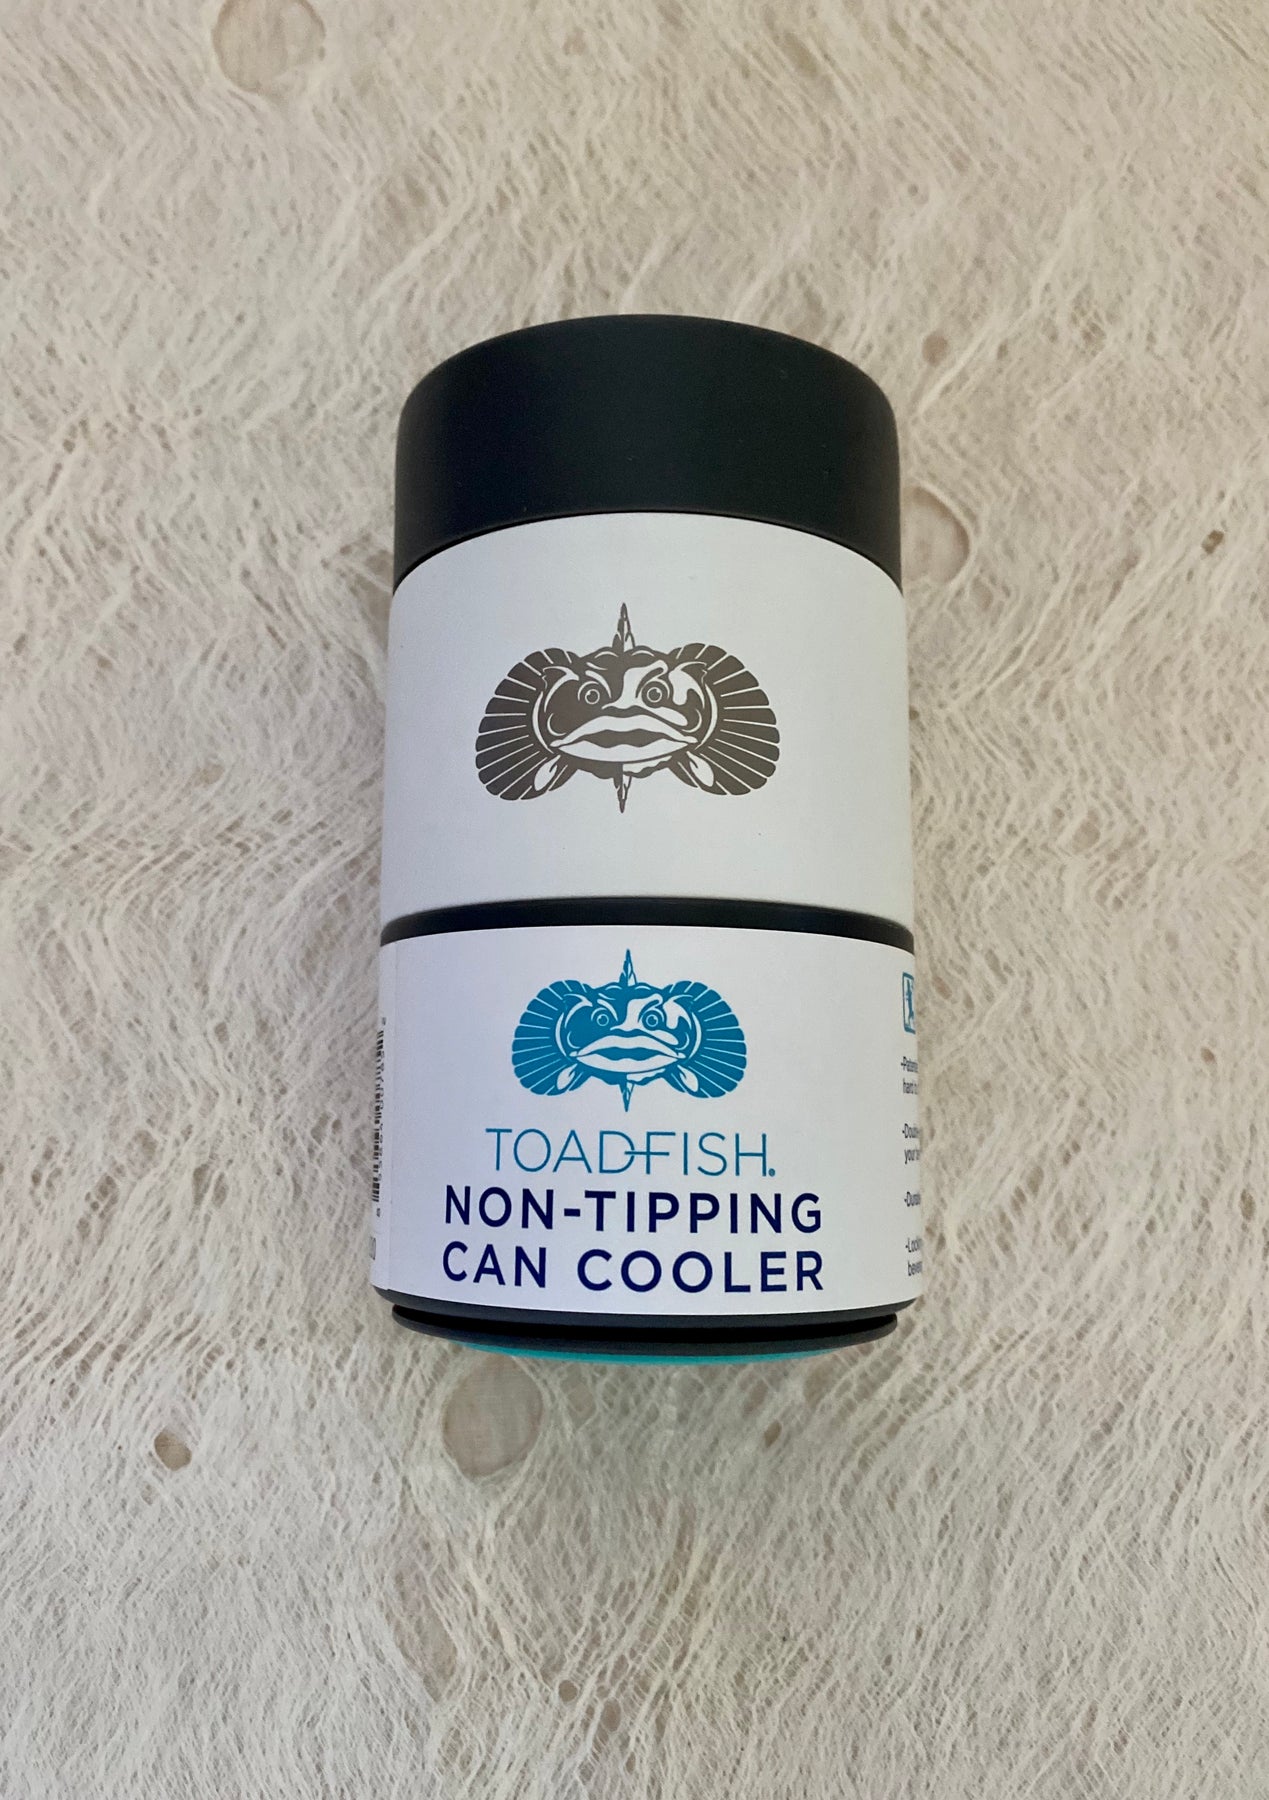 Toadfish Non-Tipping Can Cooler